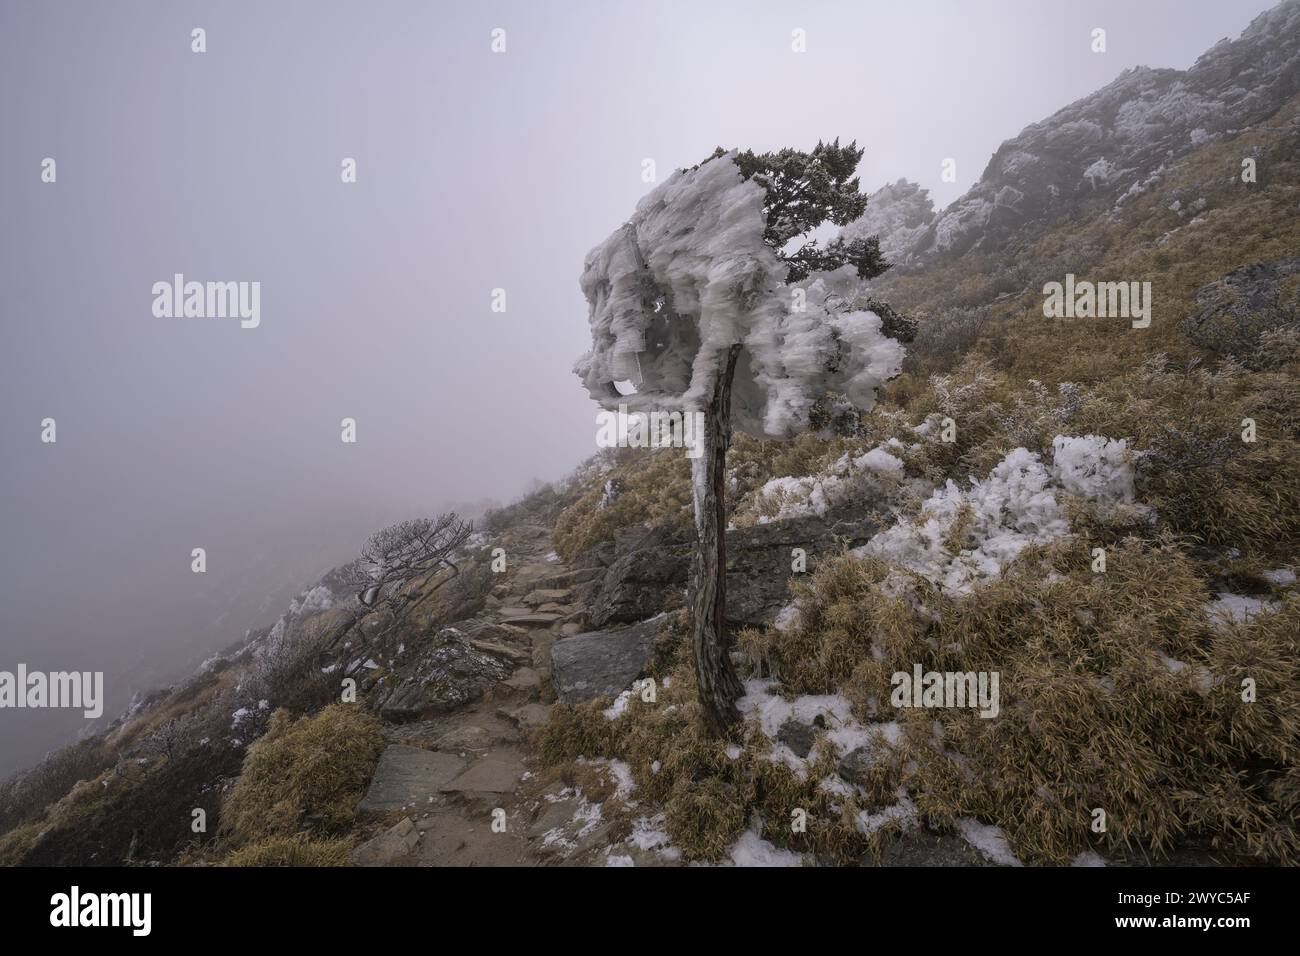 A lone tree stands covered in thick ice along a mountain trail, enveloped in heavy fog Stock Photo